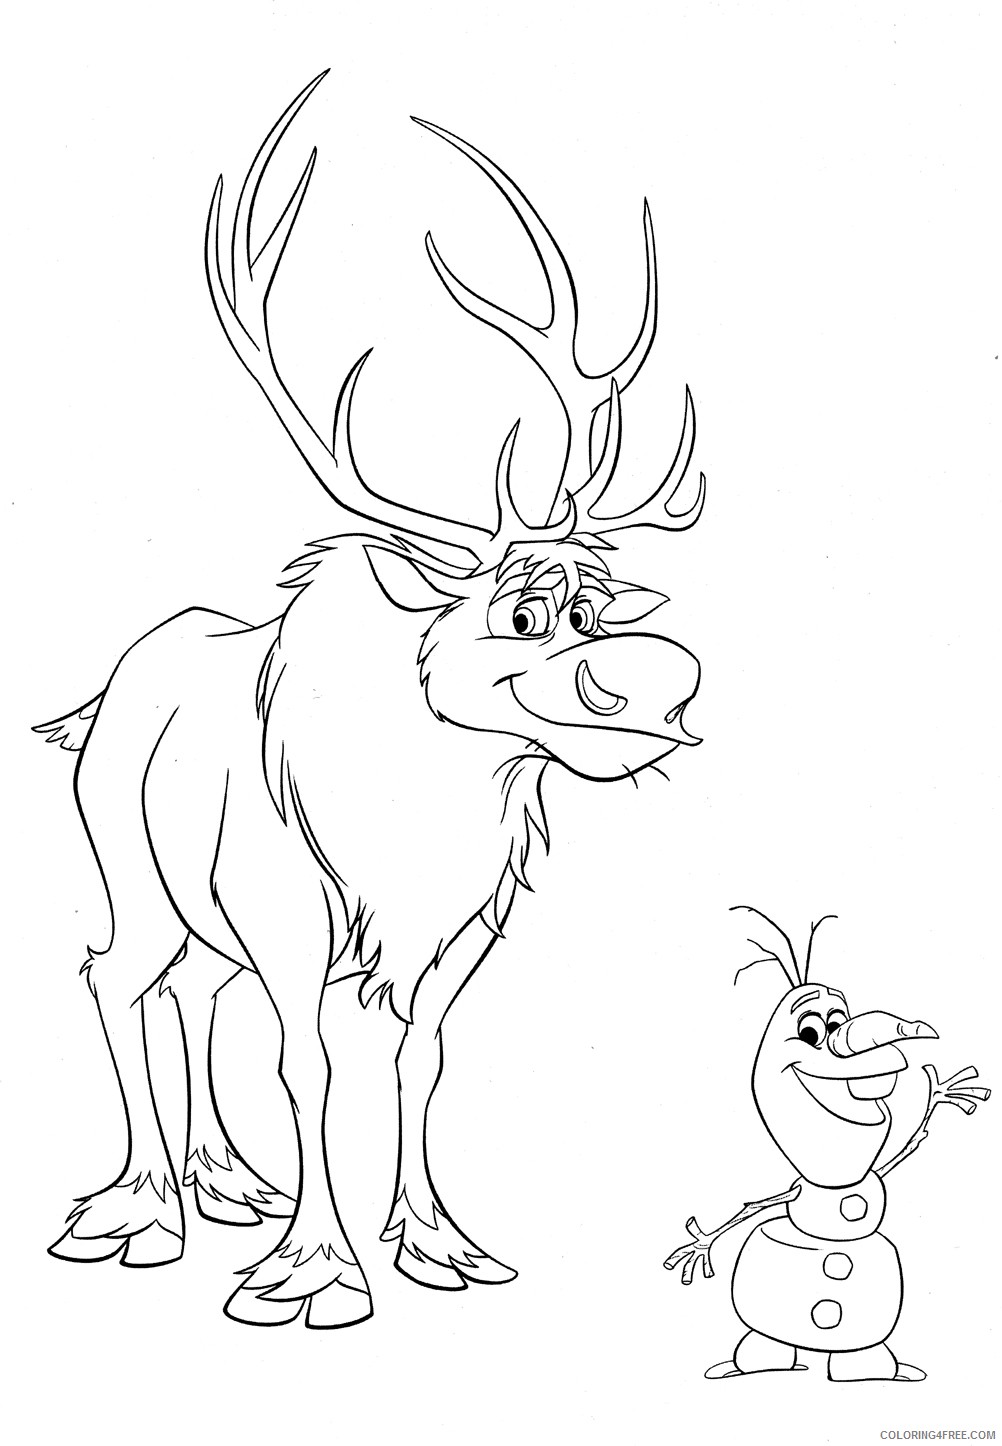 olaf coloring pages with sven Coloring4free